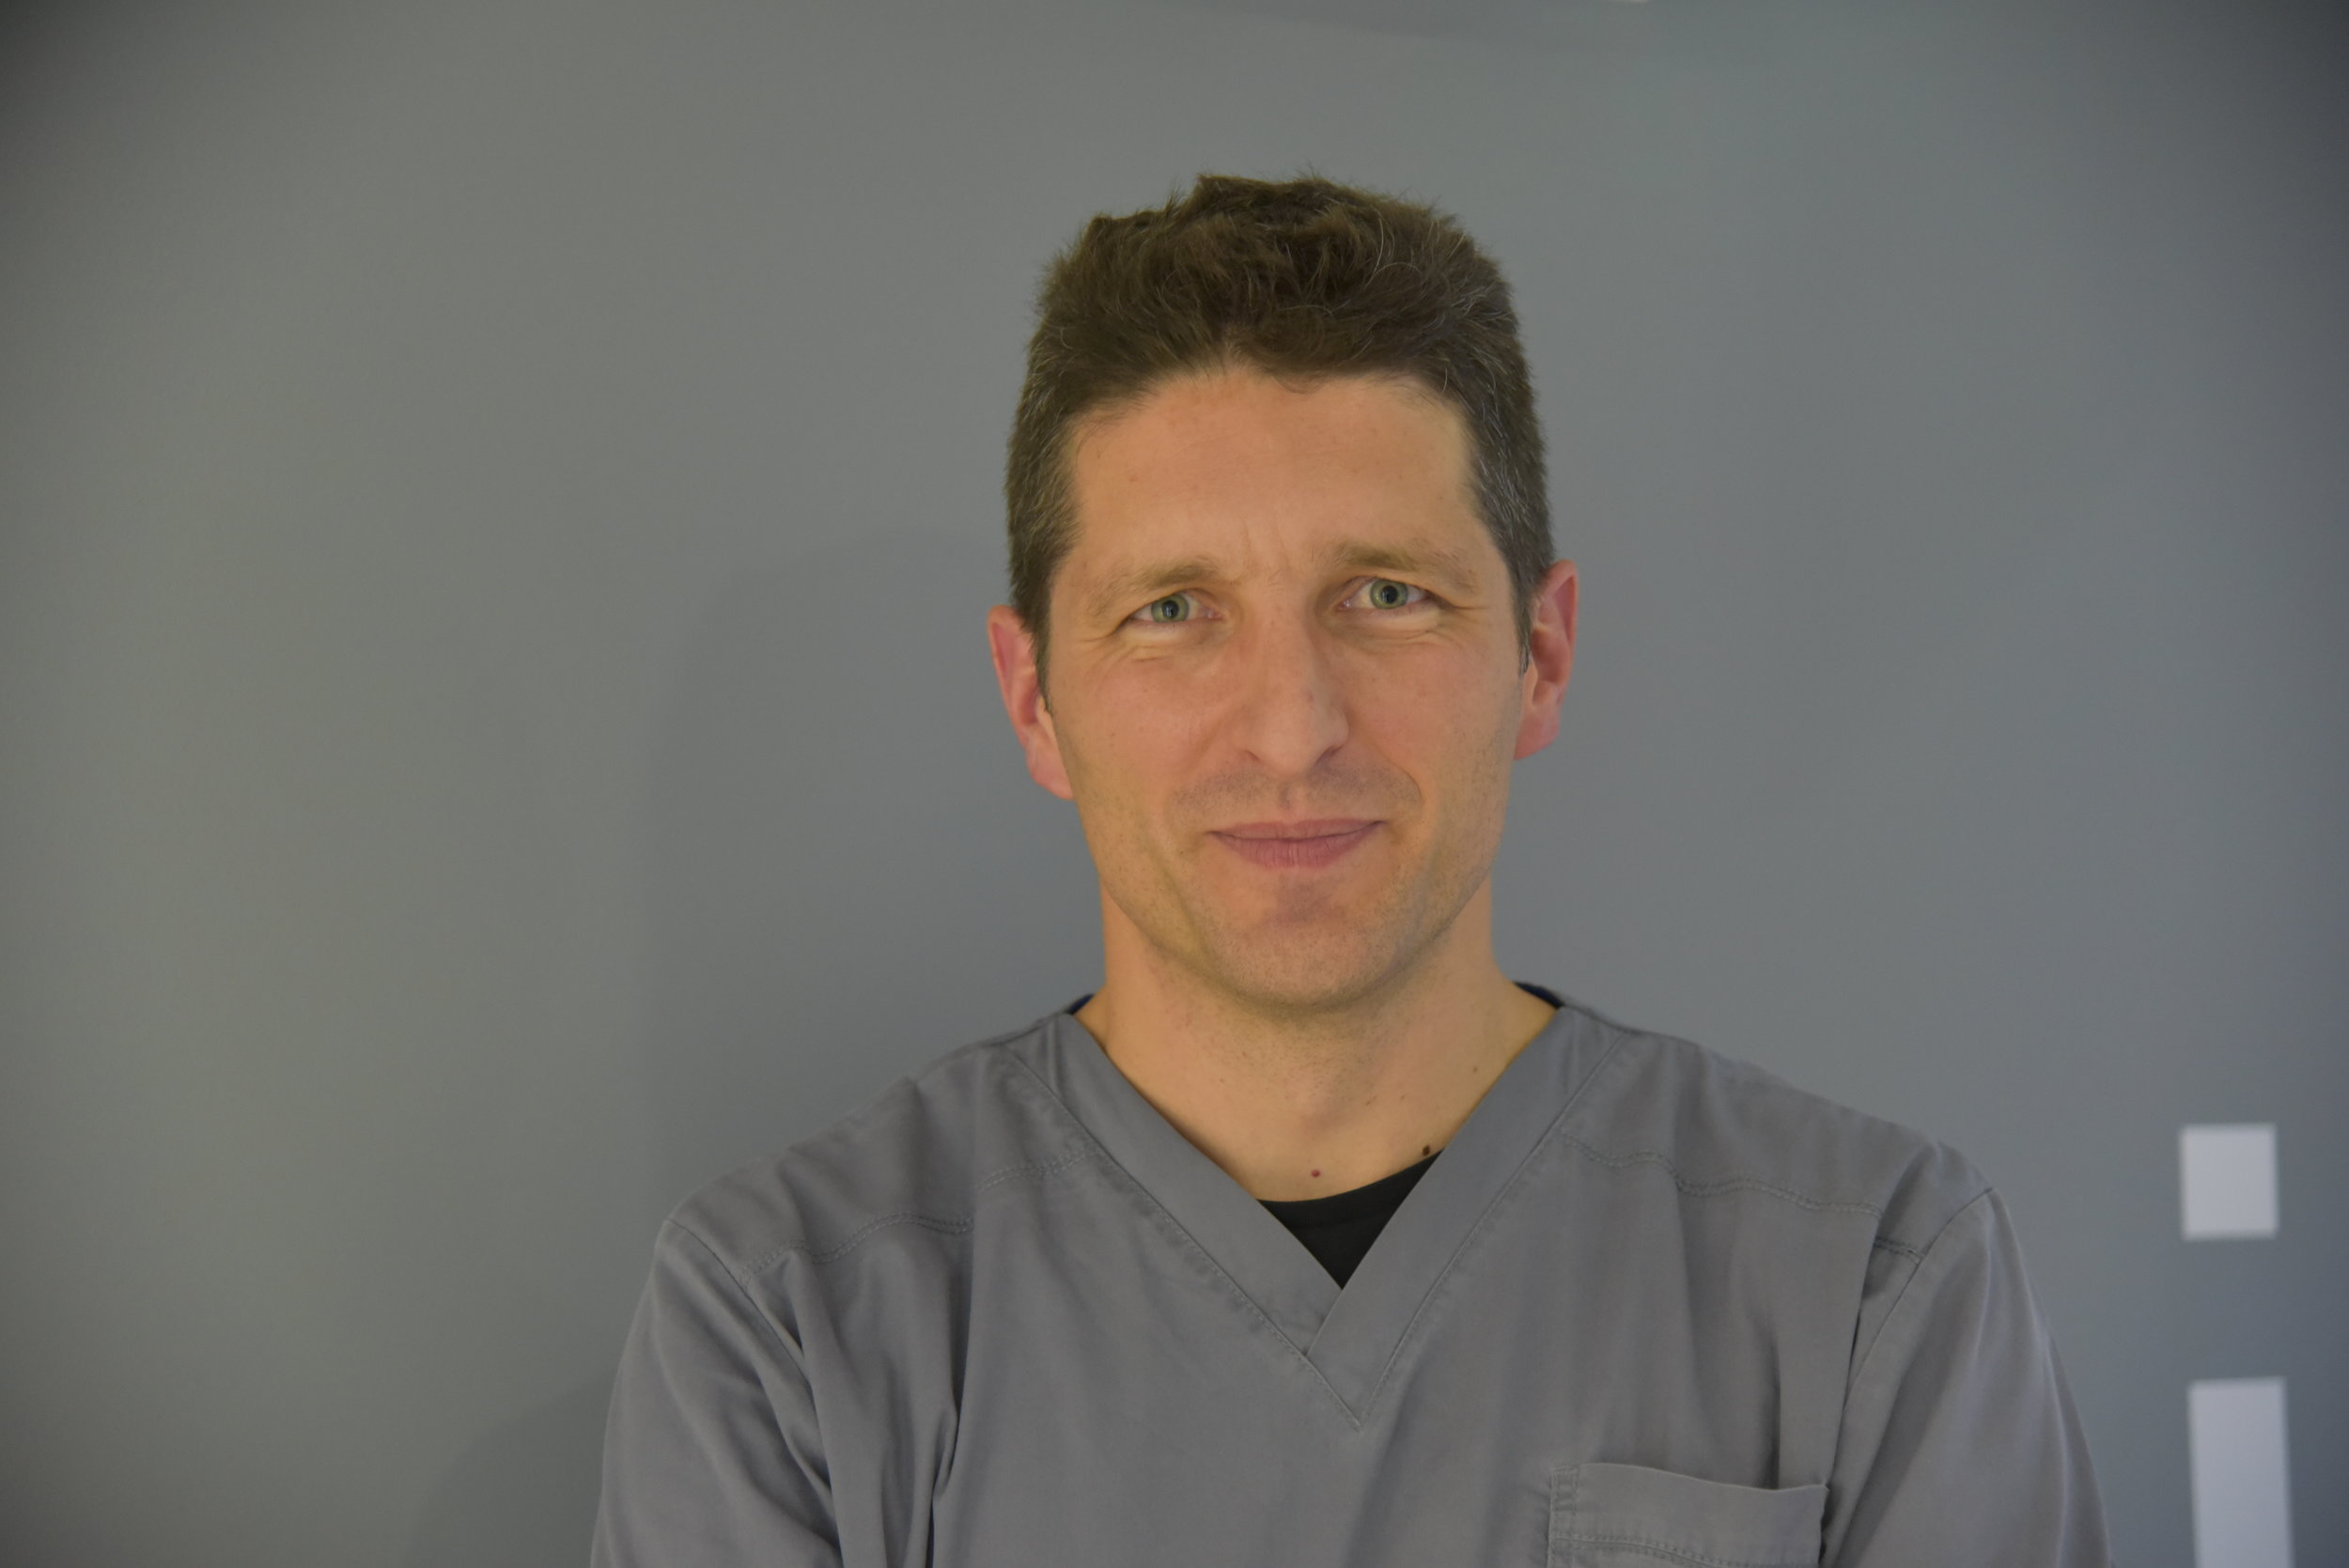 Dr. Eleftherios Martinis, Implantologist and Oral Surgeon at tooth dental surgery in waterloo, London